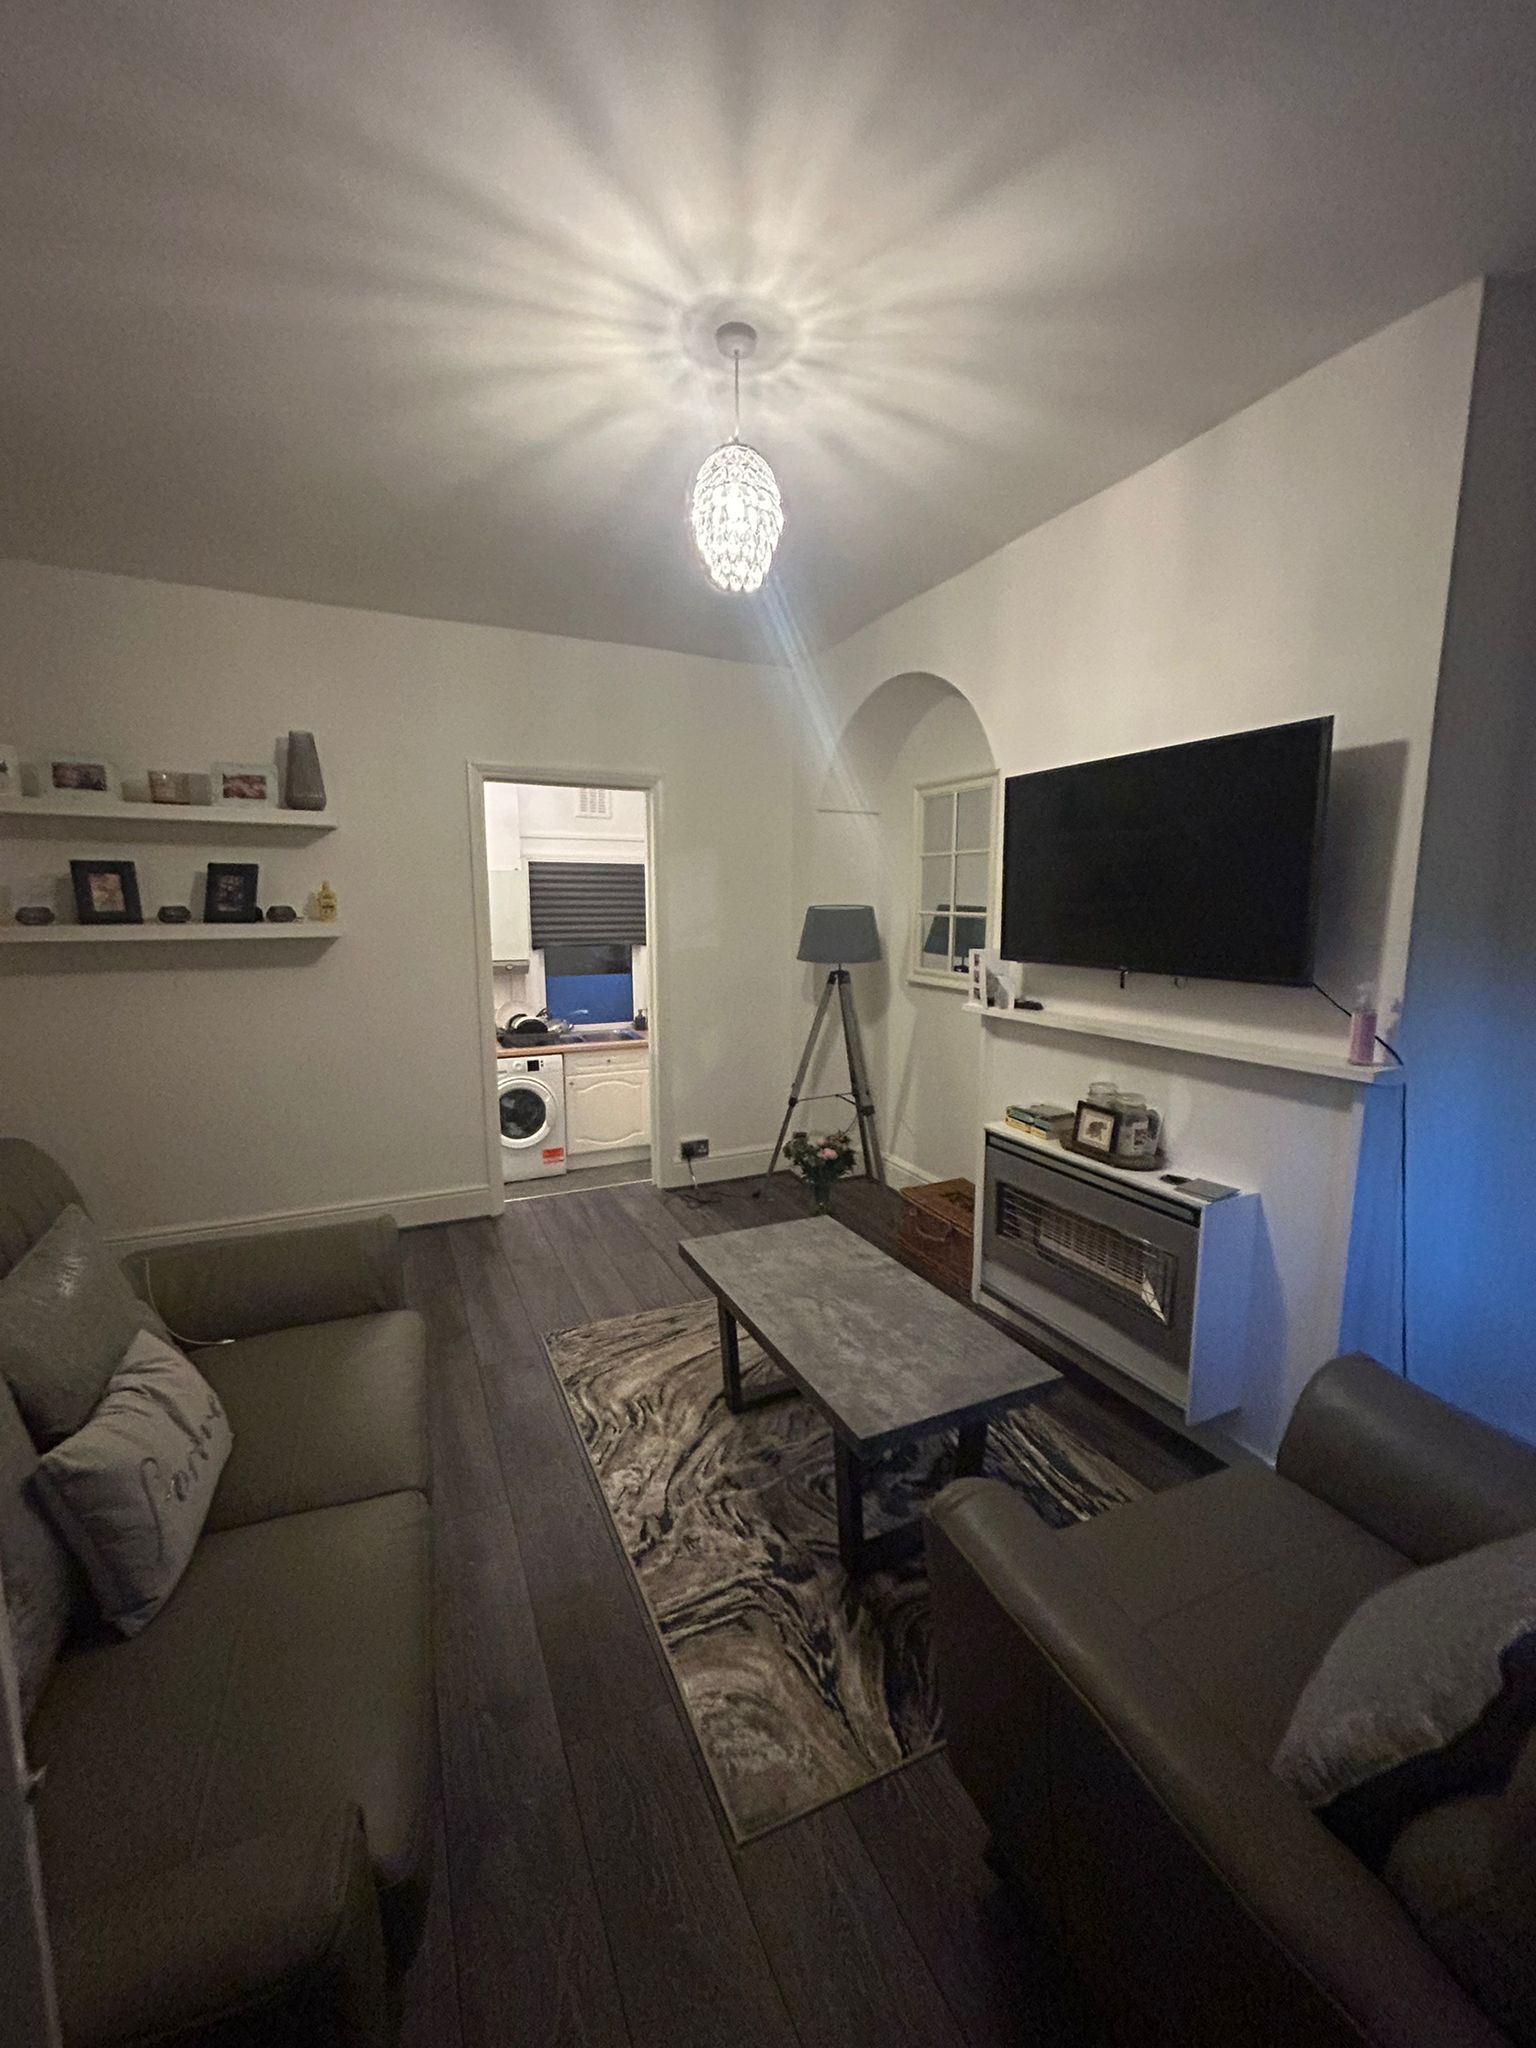 2 bed End of terrace house for rent in Streatham. From PropertyLoop